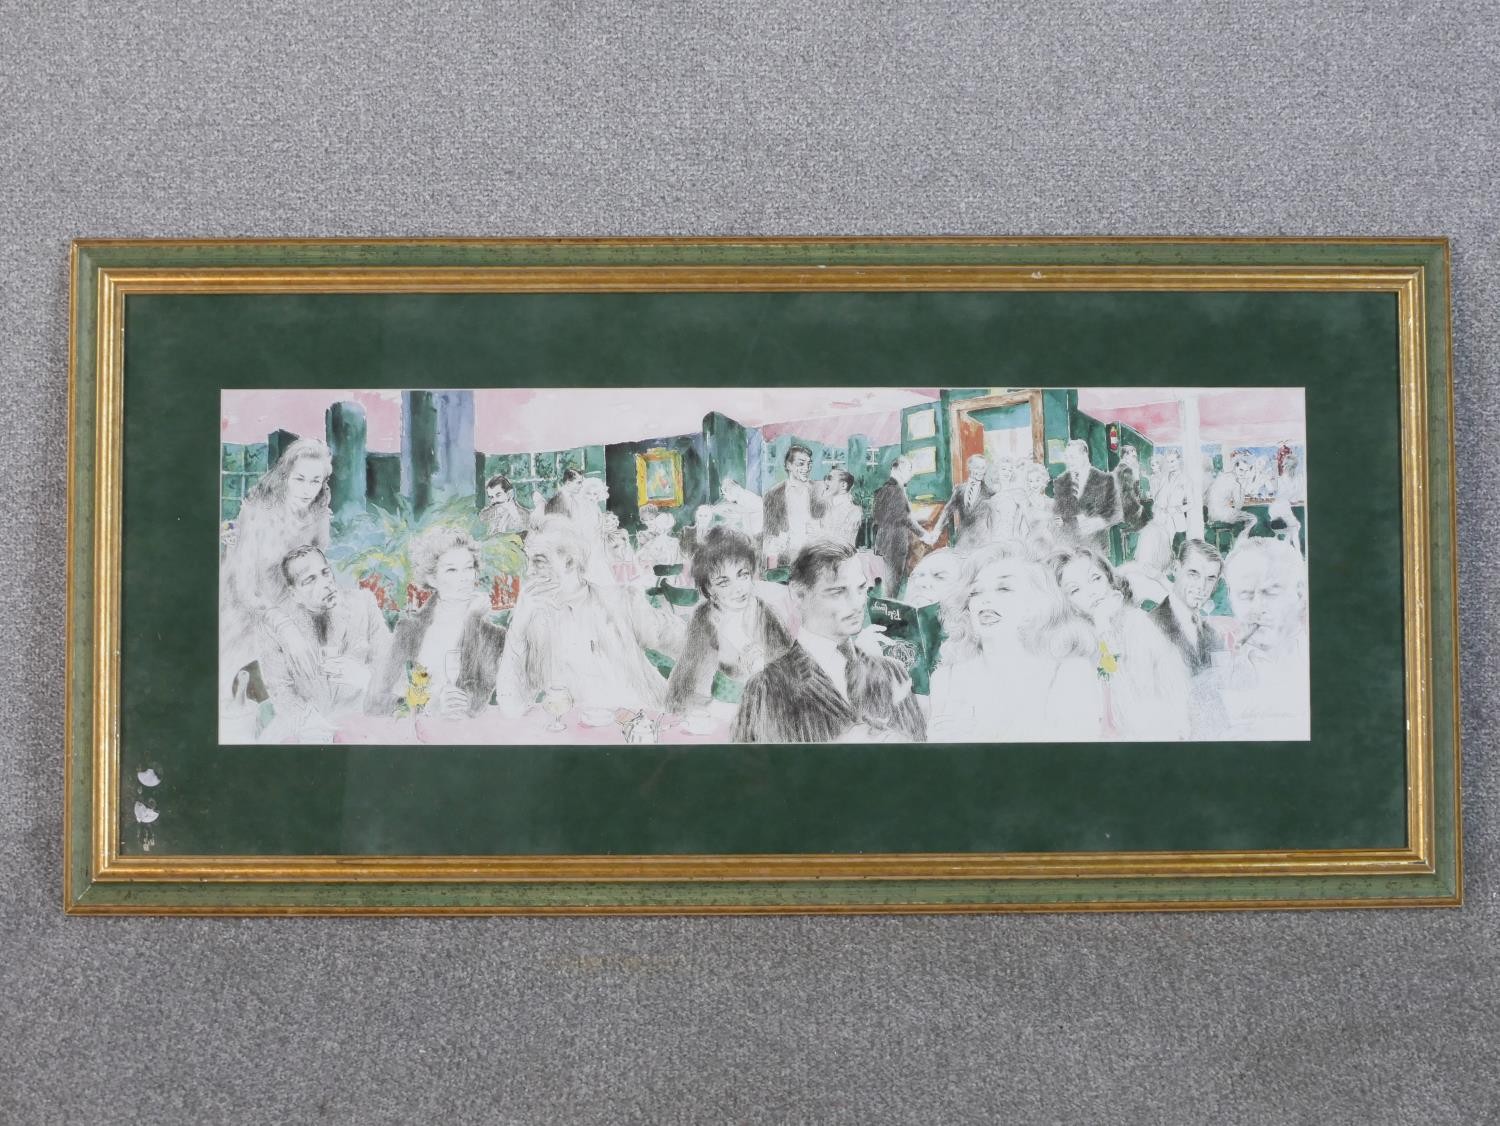 LeRoy Neiman (1921-2012, American), Polo Lounge, lithograph on paper. H.52 W.106cm - Image 2 of 7